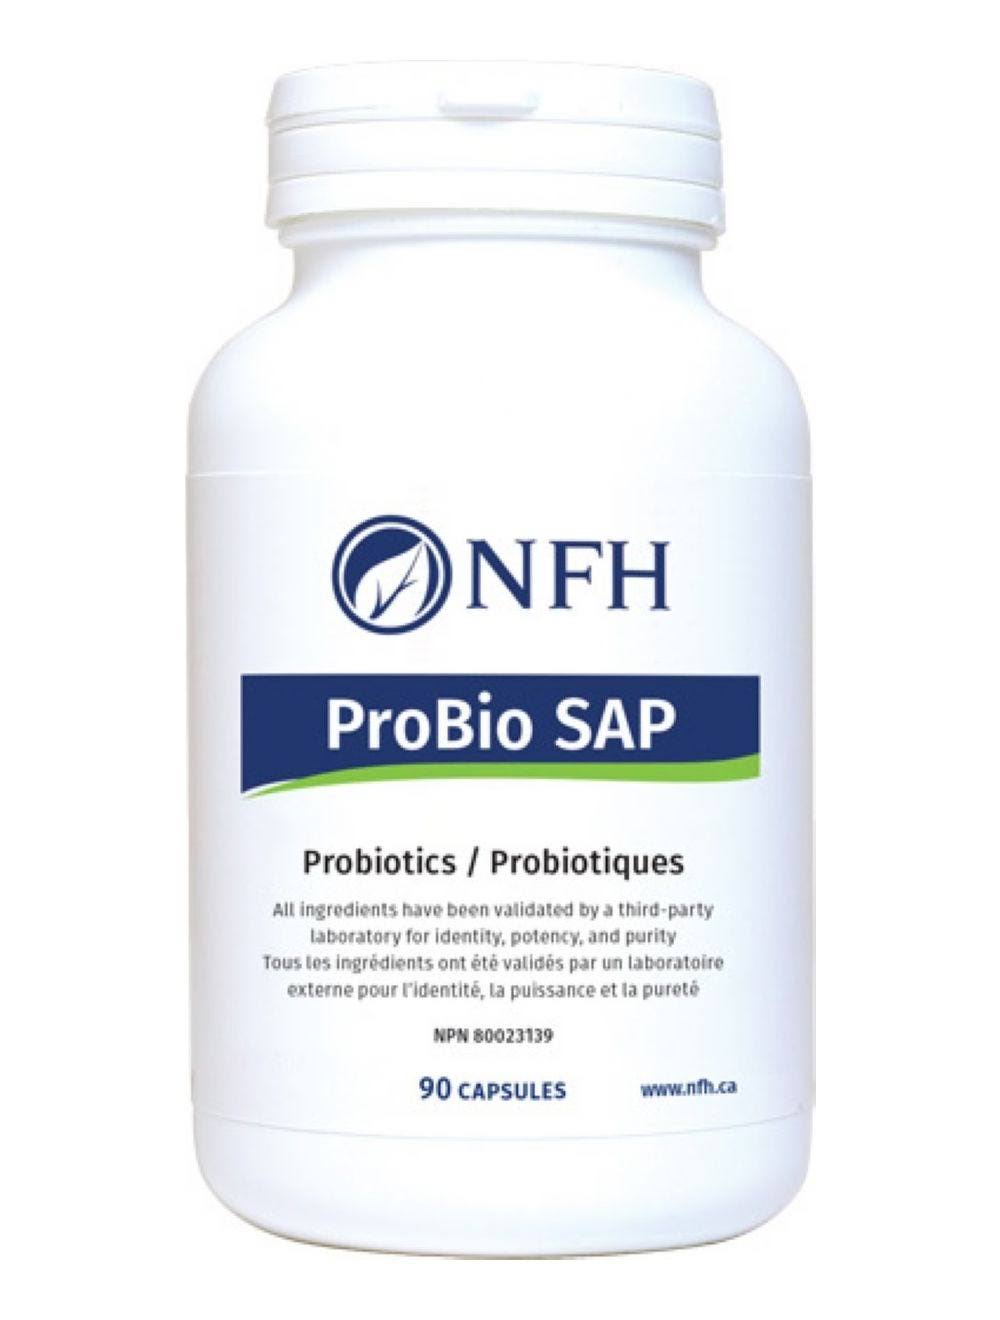 Nutritional Fundamentals for Health Pro Bio SAP 90 Dietary Supplement - 90 Capsules